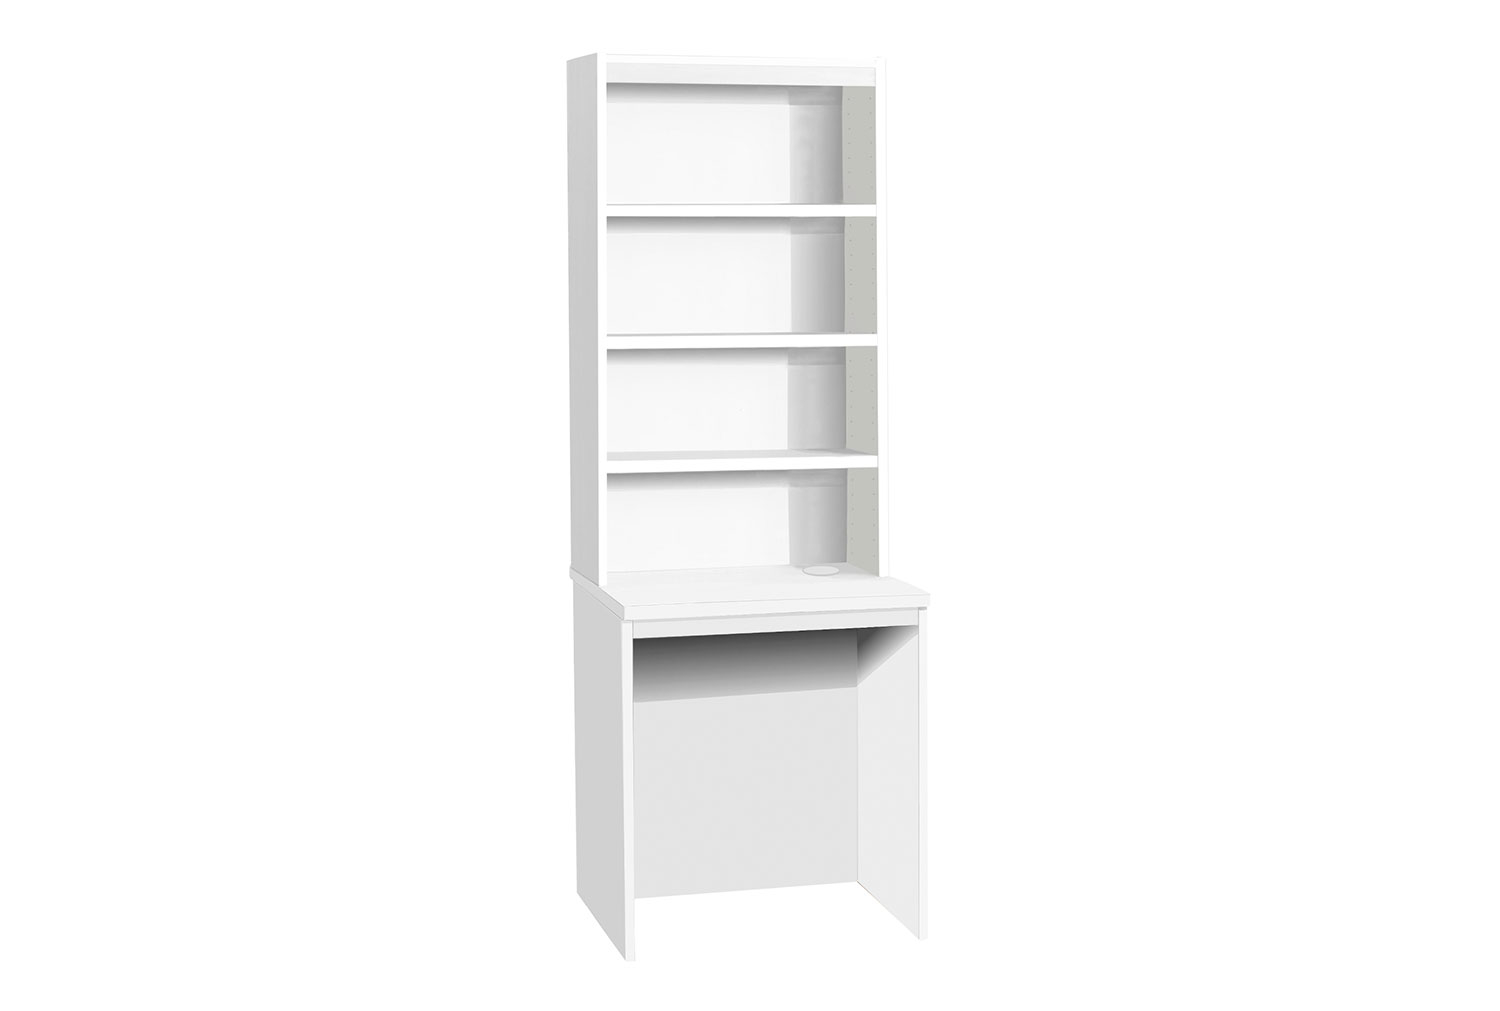 Small Office Rectangular Home Office Desk With Hutch Bookcase (White), 60wx54dx182h (cm)